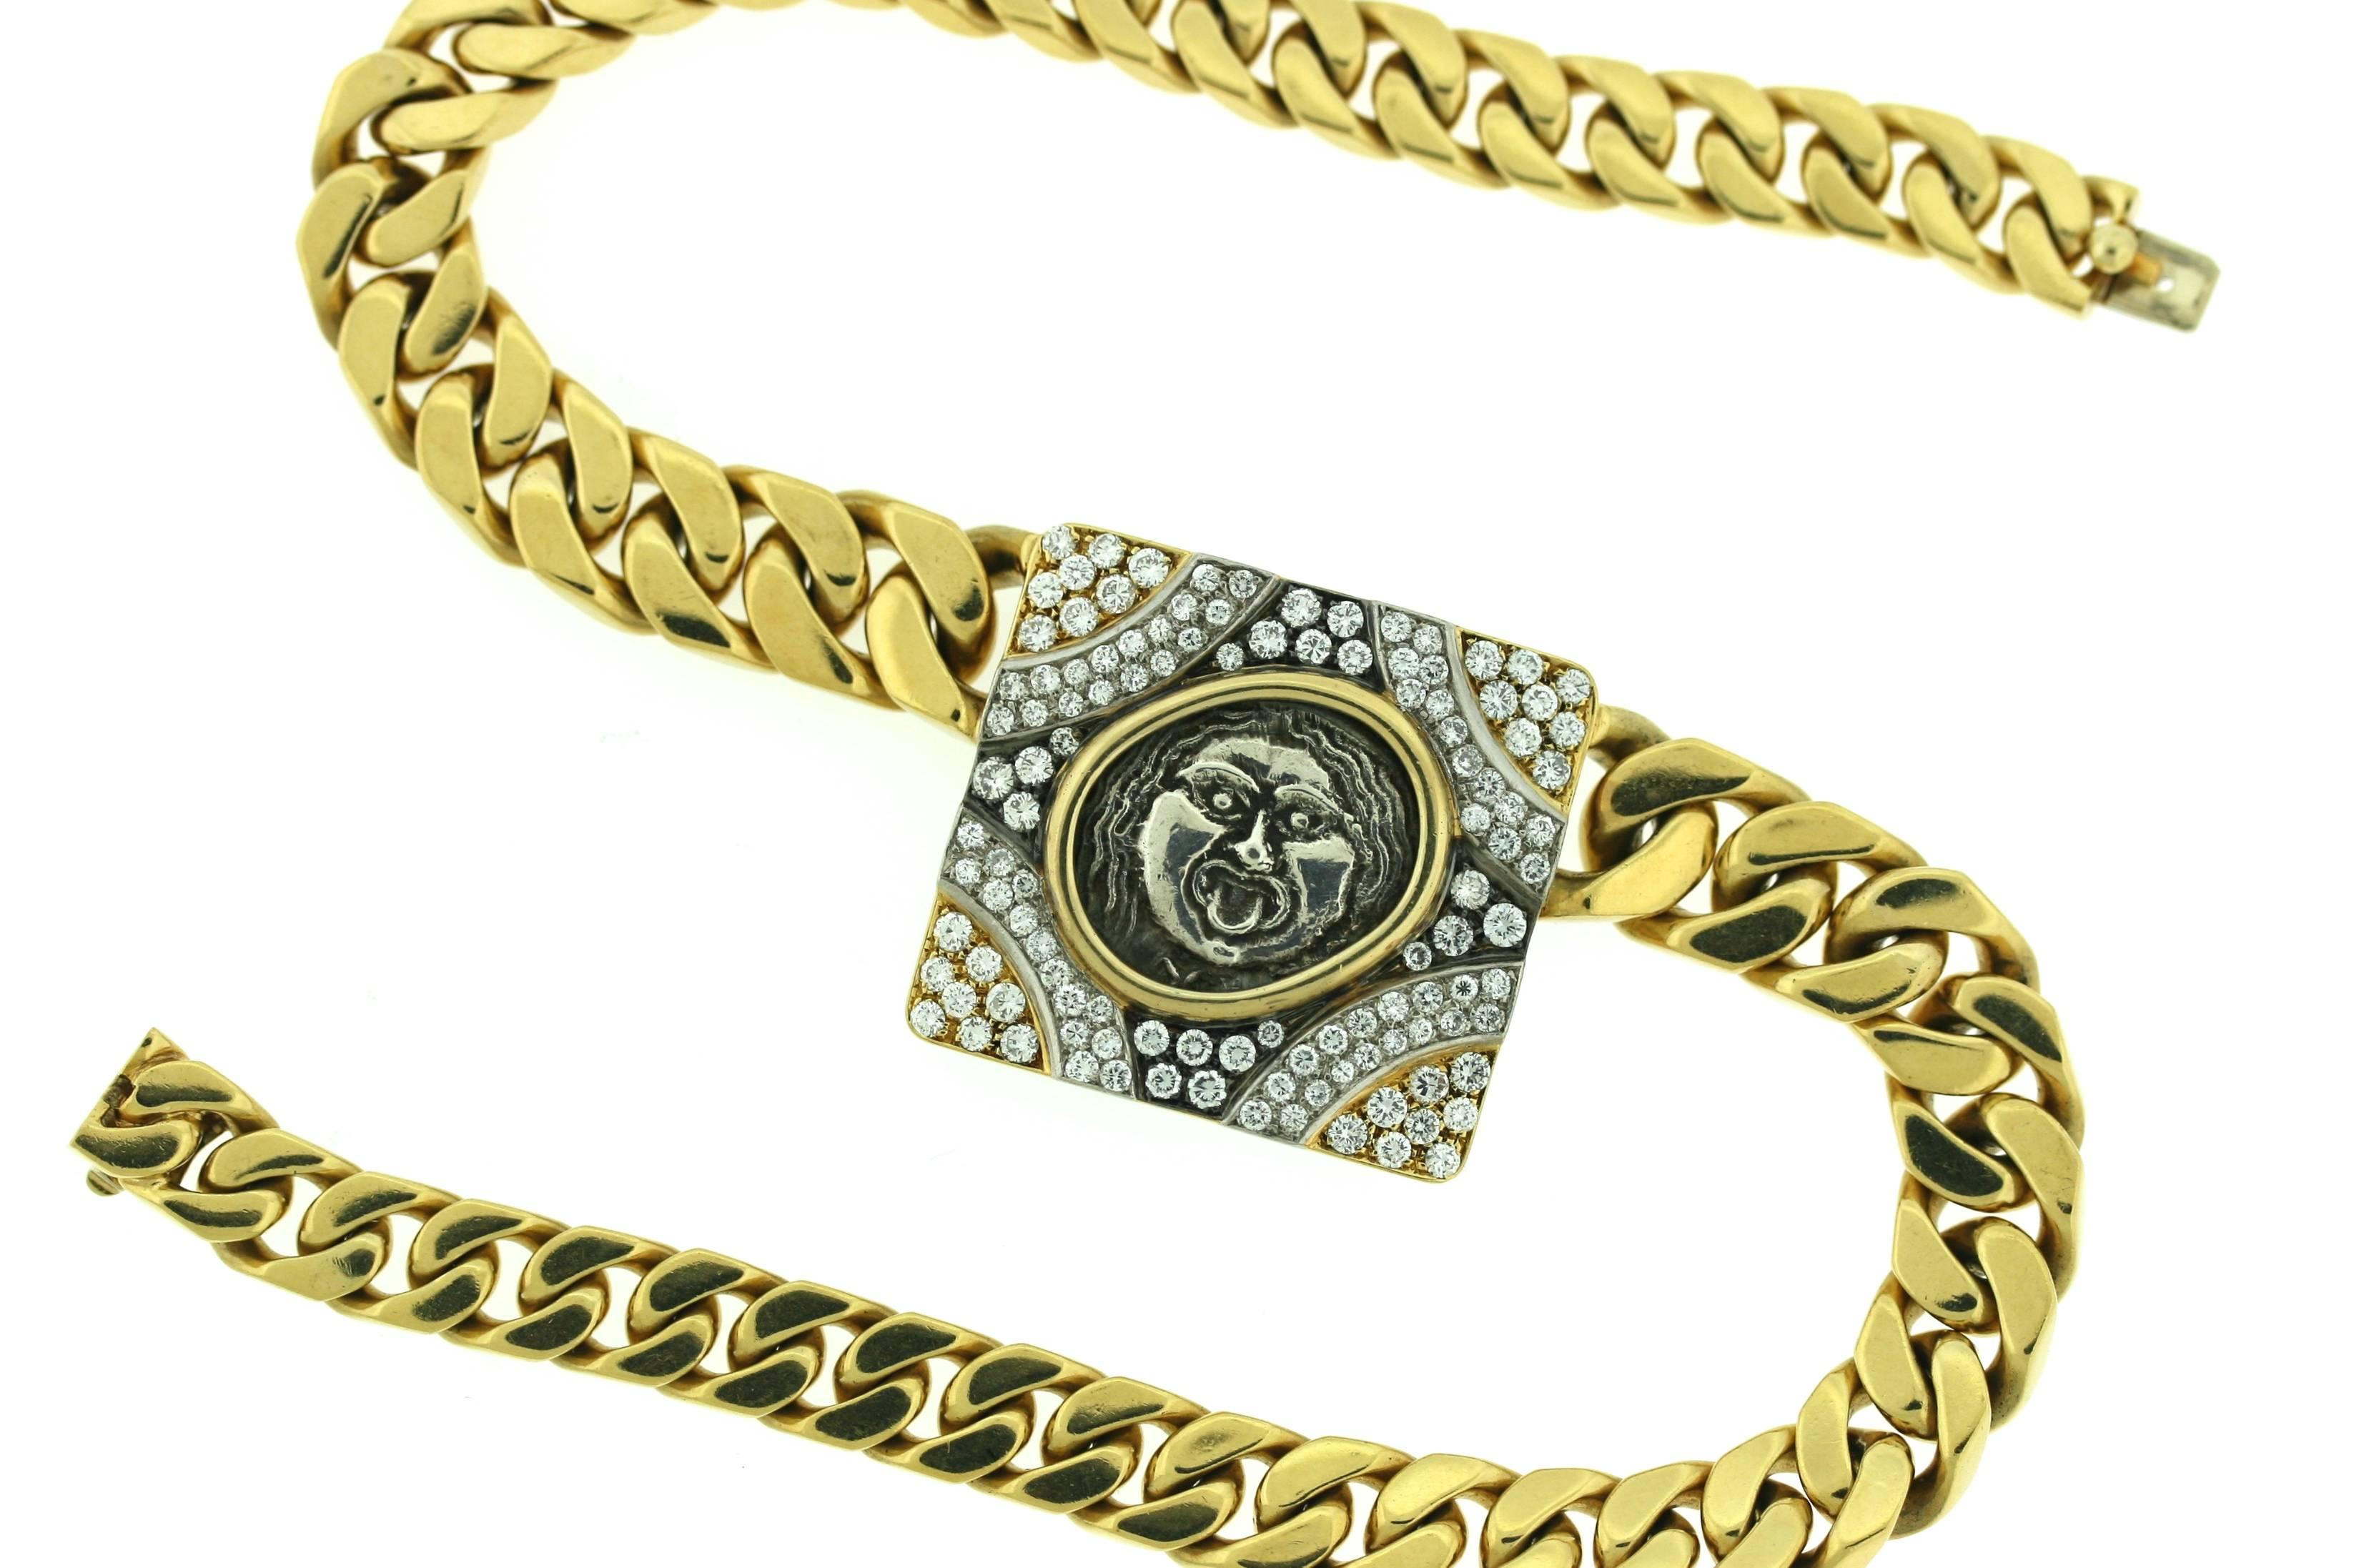 Bulgari 18k gold necklace designed as a thick solid curb link chain centering an ancient coin set within a square frame of diamonds in yellow, white and blackened gold. Engraving on the reverse side of the coin reads 